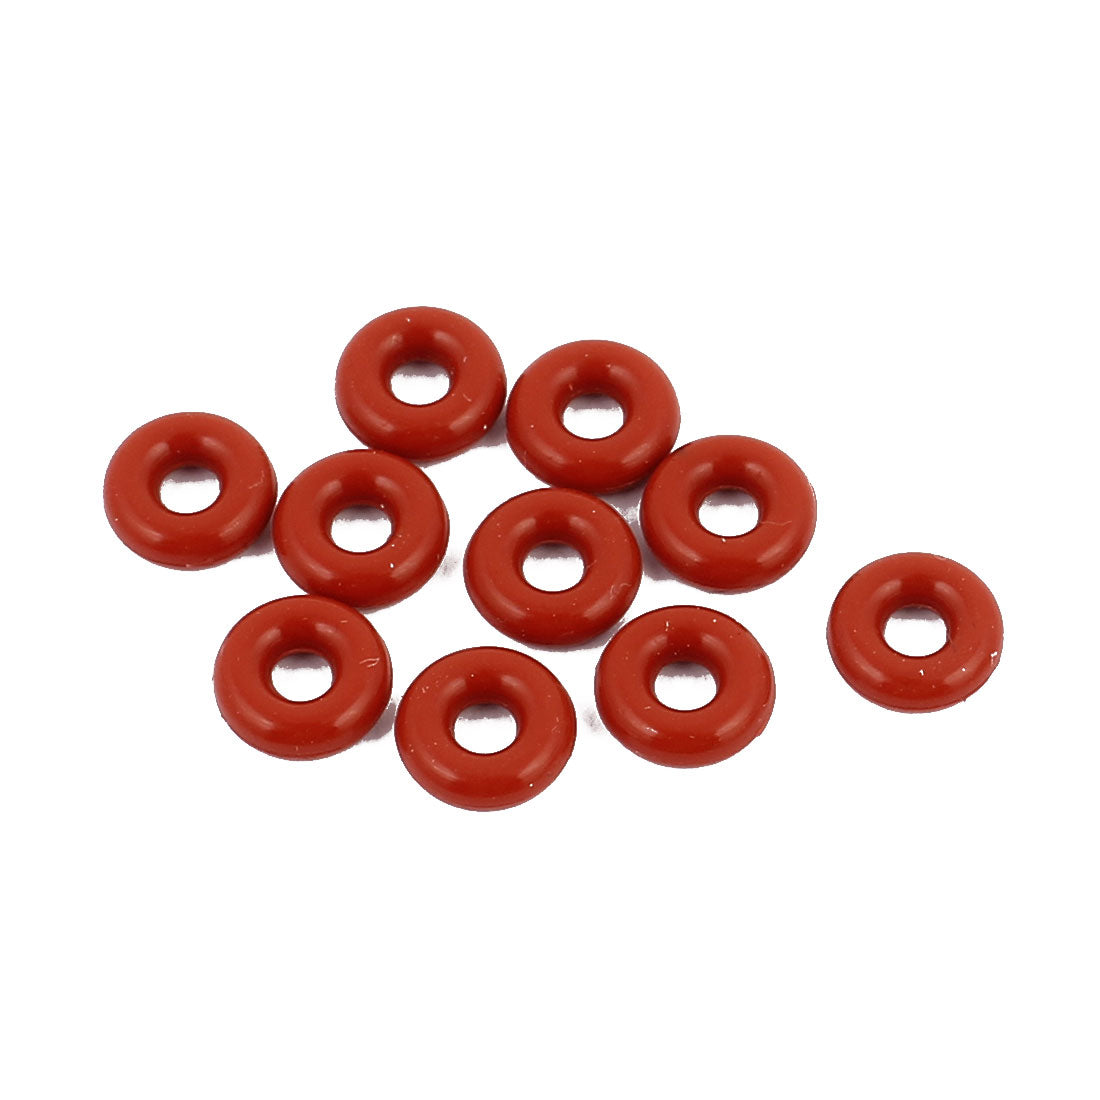 uxcell Uxcell 10Pcs 6mm x 1.9mm Rubber O-rings NBR Heat Resistant Sealing Ring Grommets Red